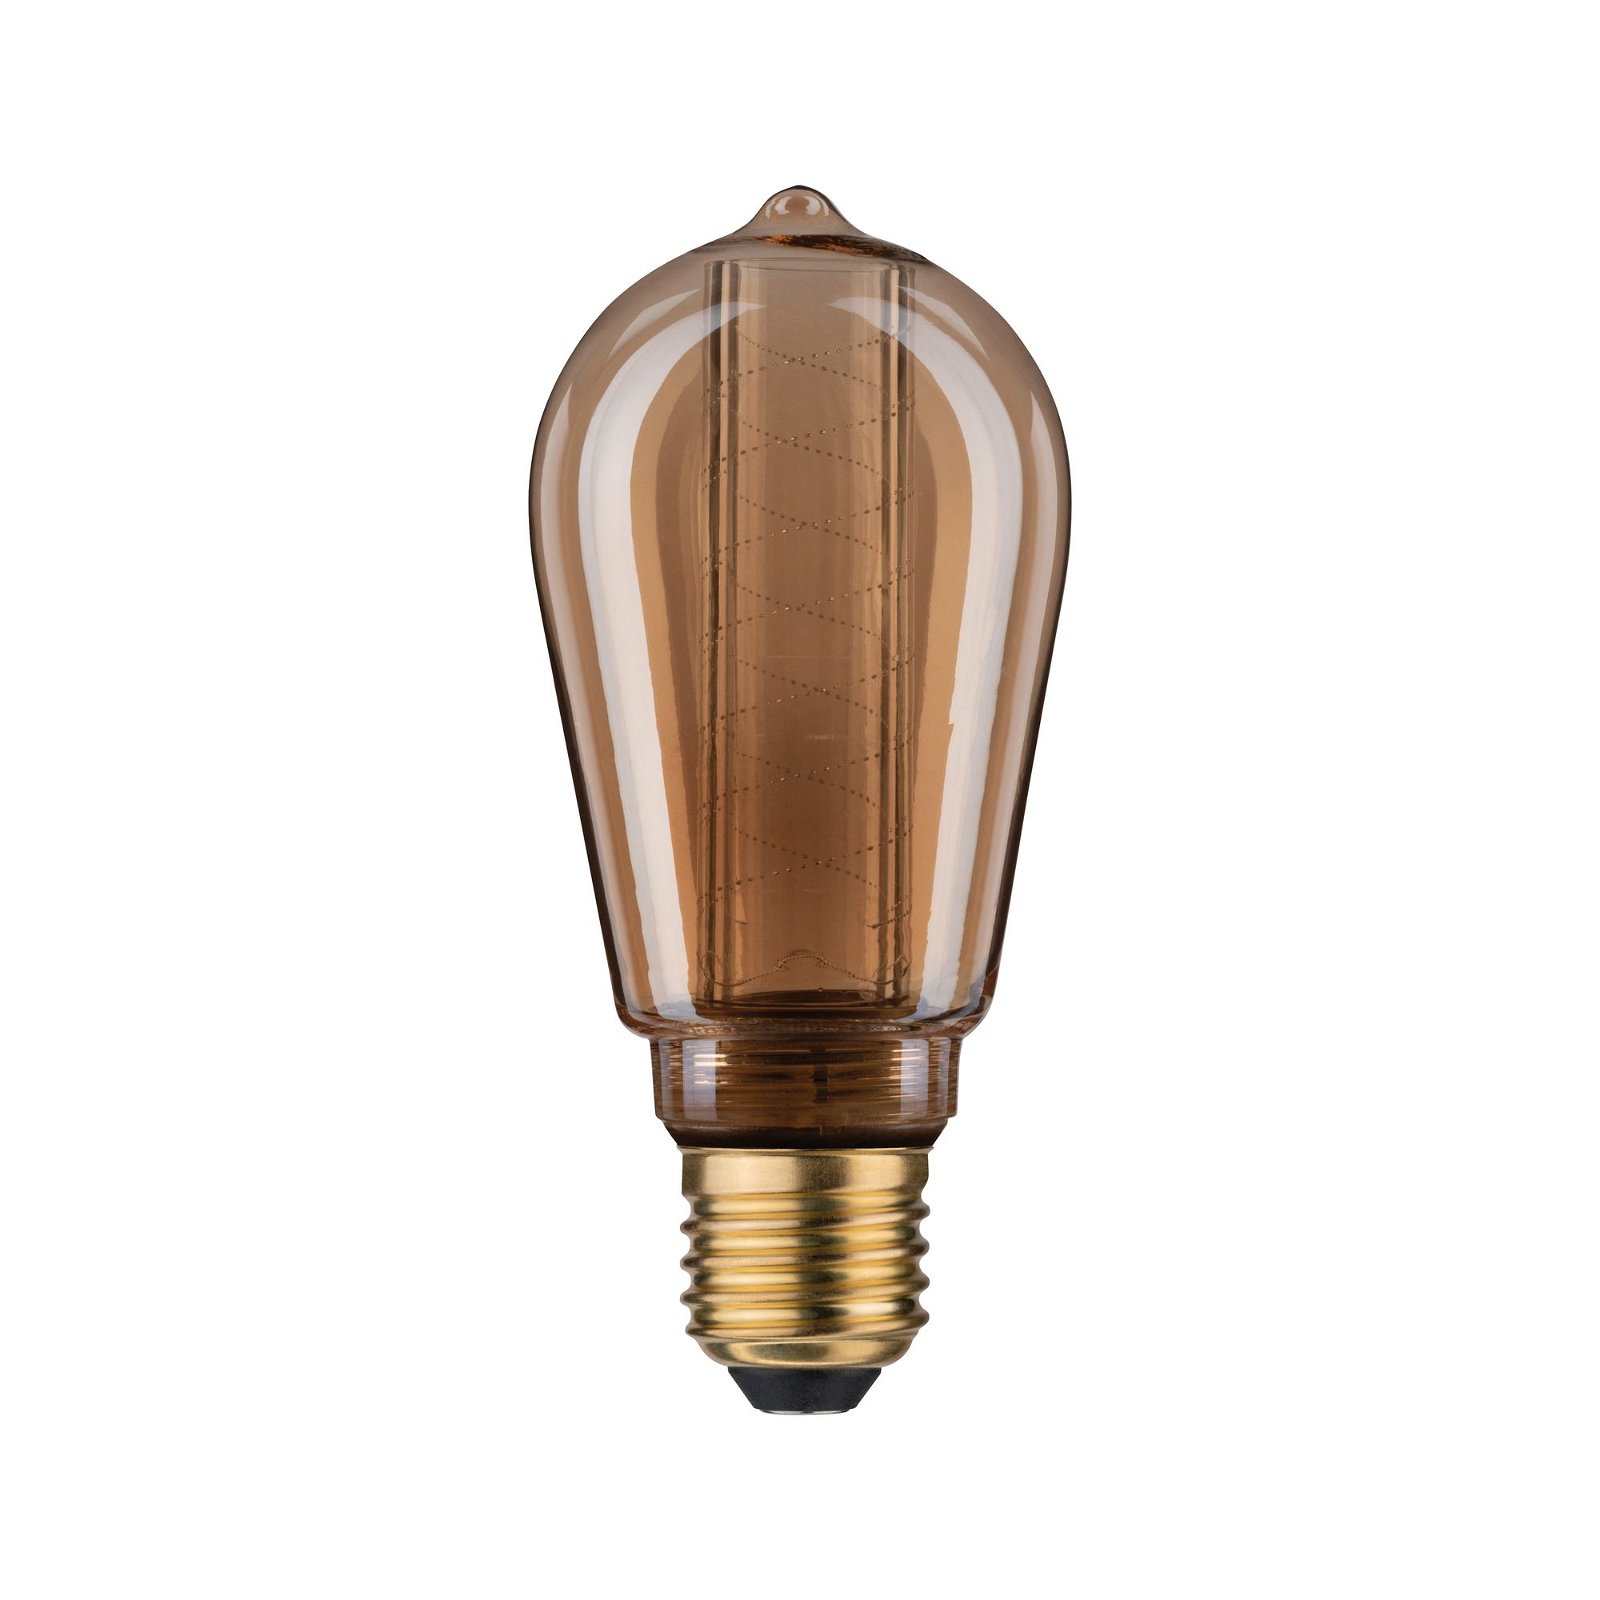 Inner Glow Edition LED Corn Internal corn spiral pattern E27 230V 120lm 3,6W 1800K dimmable Gold